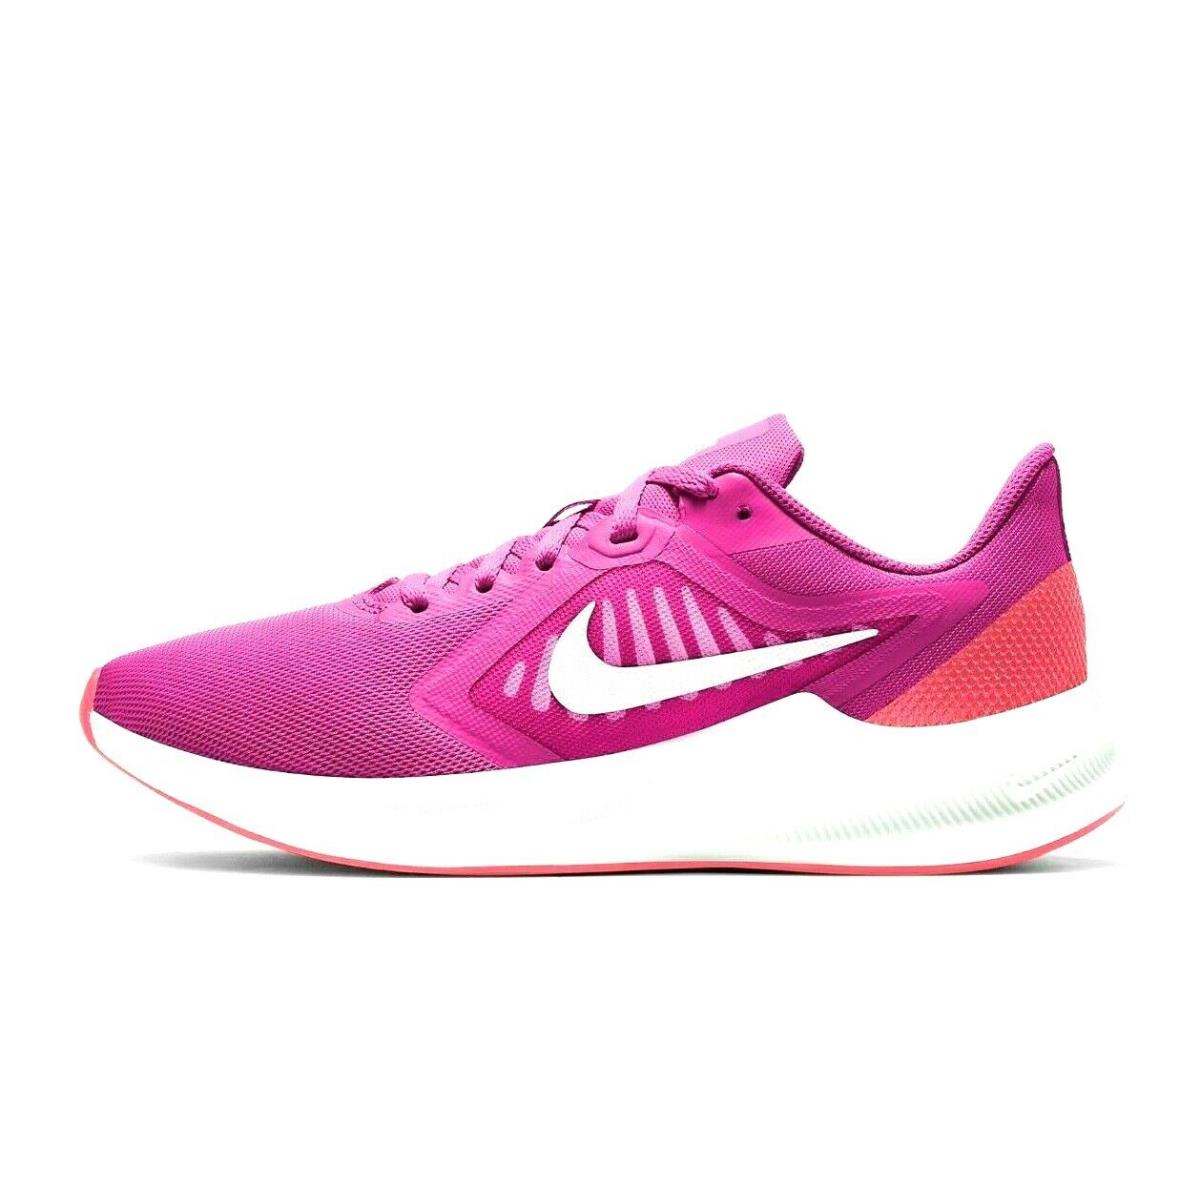 Womens Nike Air Downshifter 10 Pink White Training Athletic Running Shoes